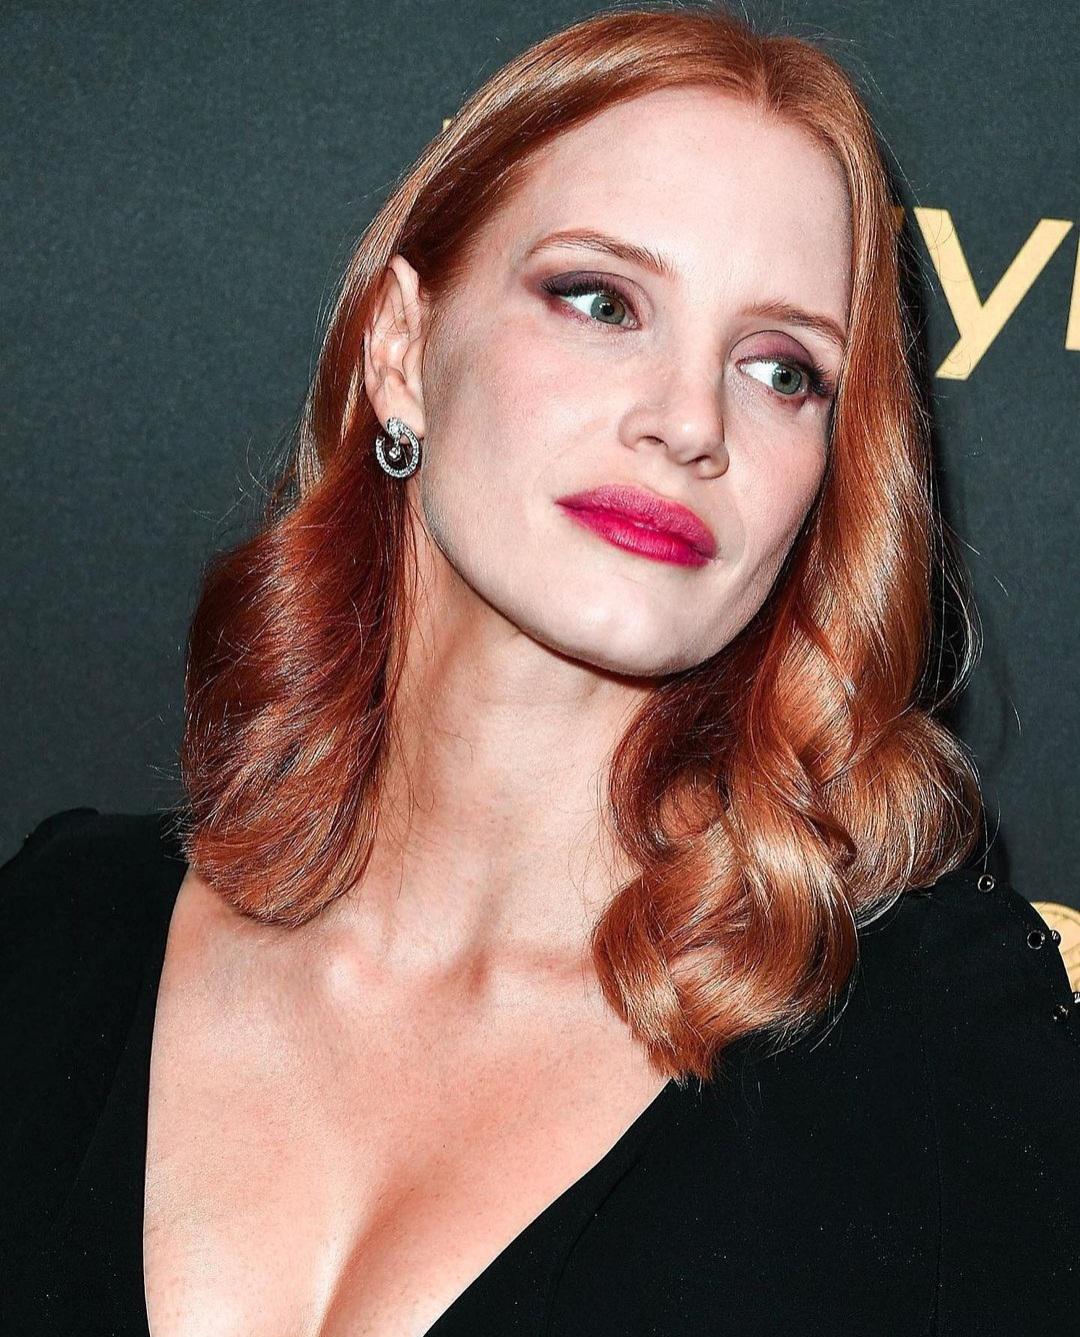 Jessica Chastain Is So Incredibly Hot